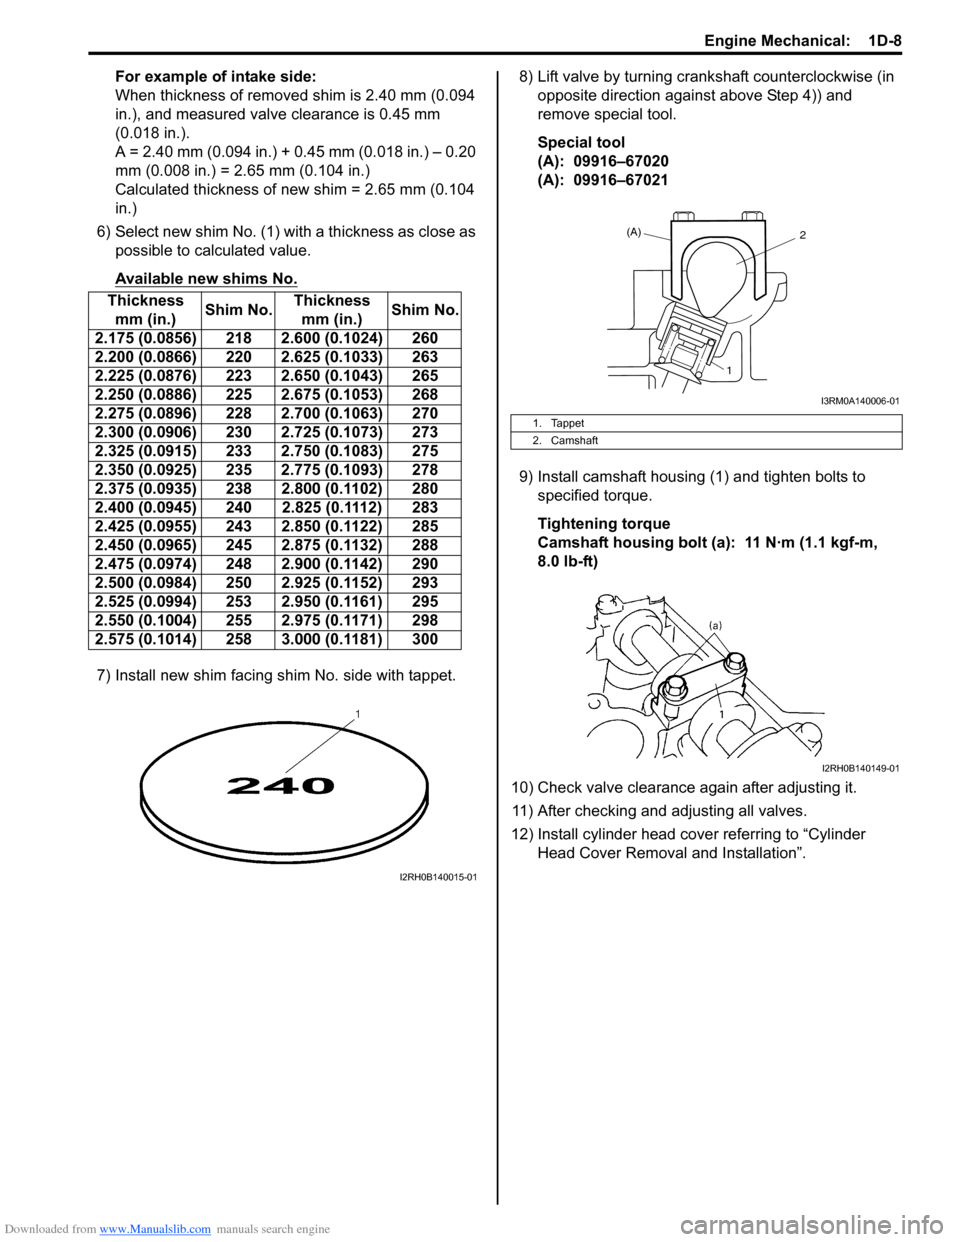 SUZUKI SWIFT 2007 2.G Service Workshop Manual Downloaded from www.Manualslib.com manuals search engine Engine Mechanical:  1D-8
For example of intake side:
When thickness of removed shim is 2.40 mm (0.094 
in.), and measured valve clearance is 0.